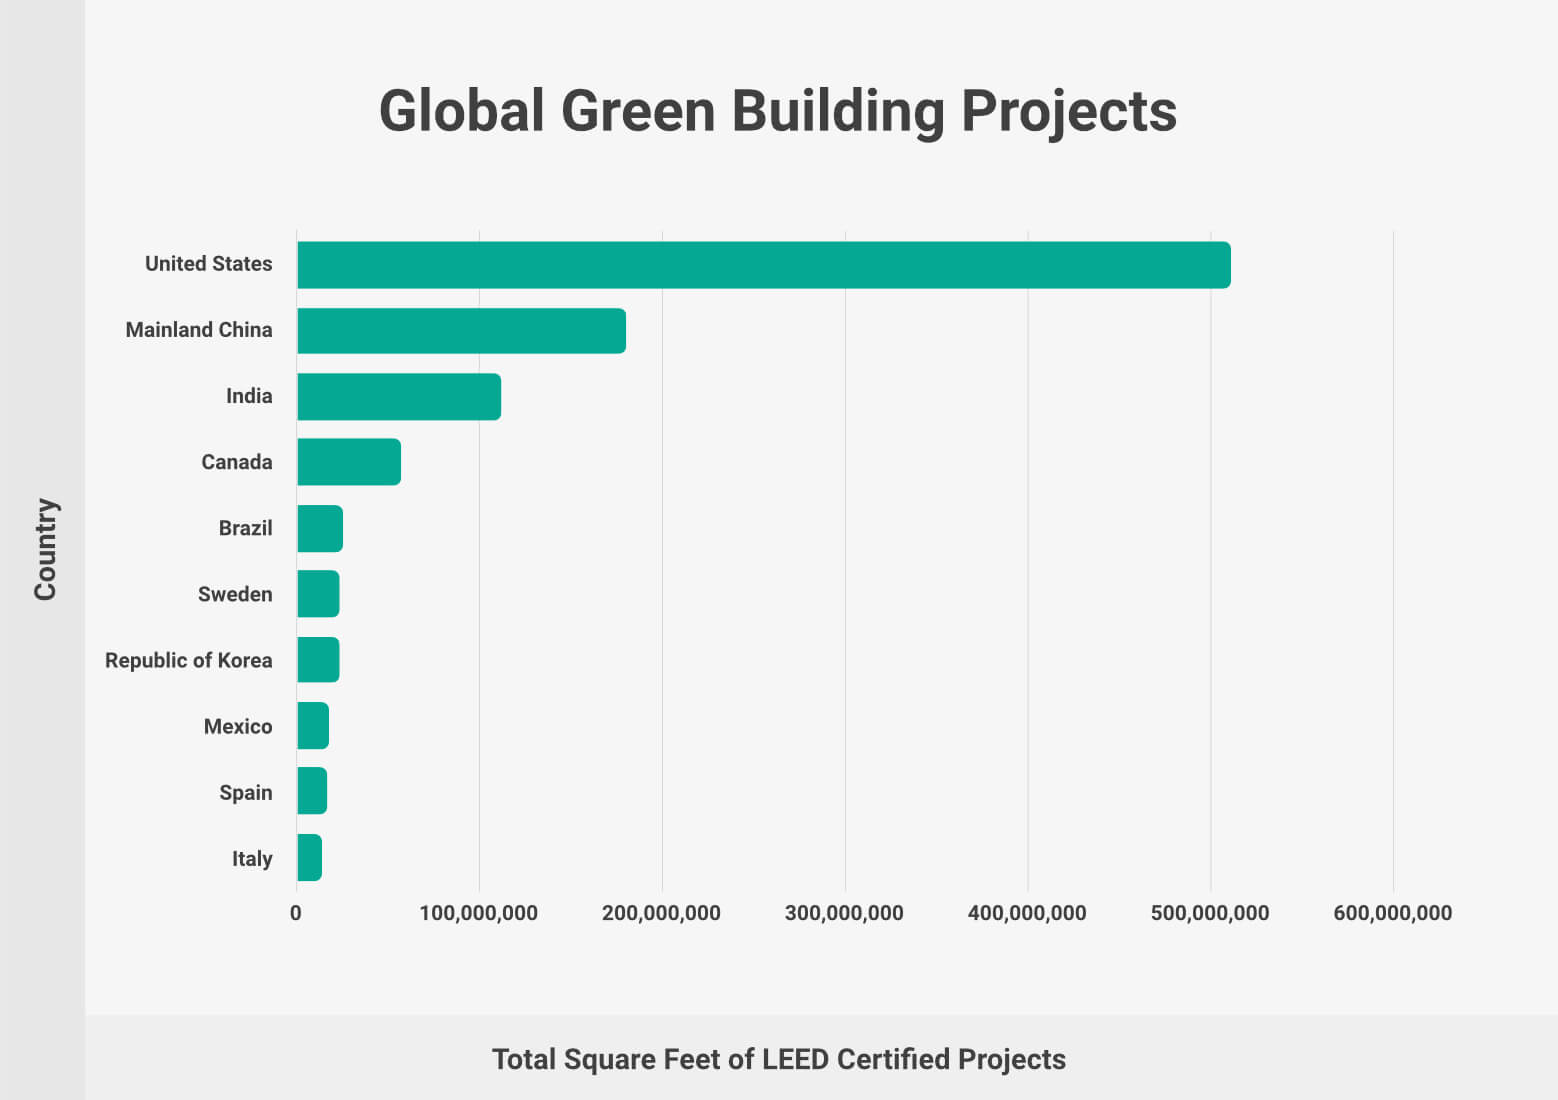 Global Green Building Projects by Country in Square Feet